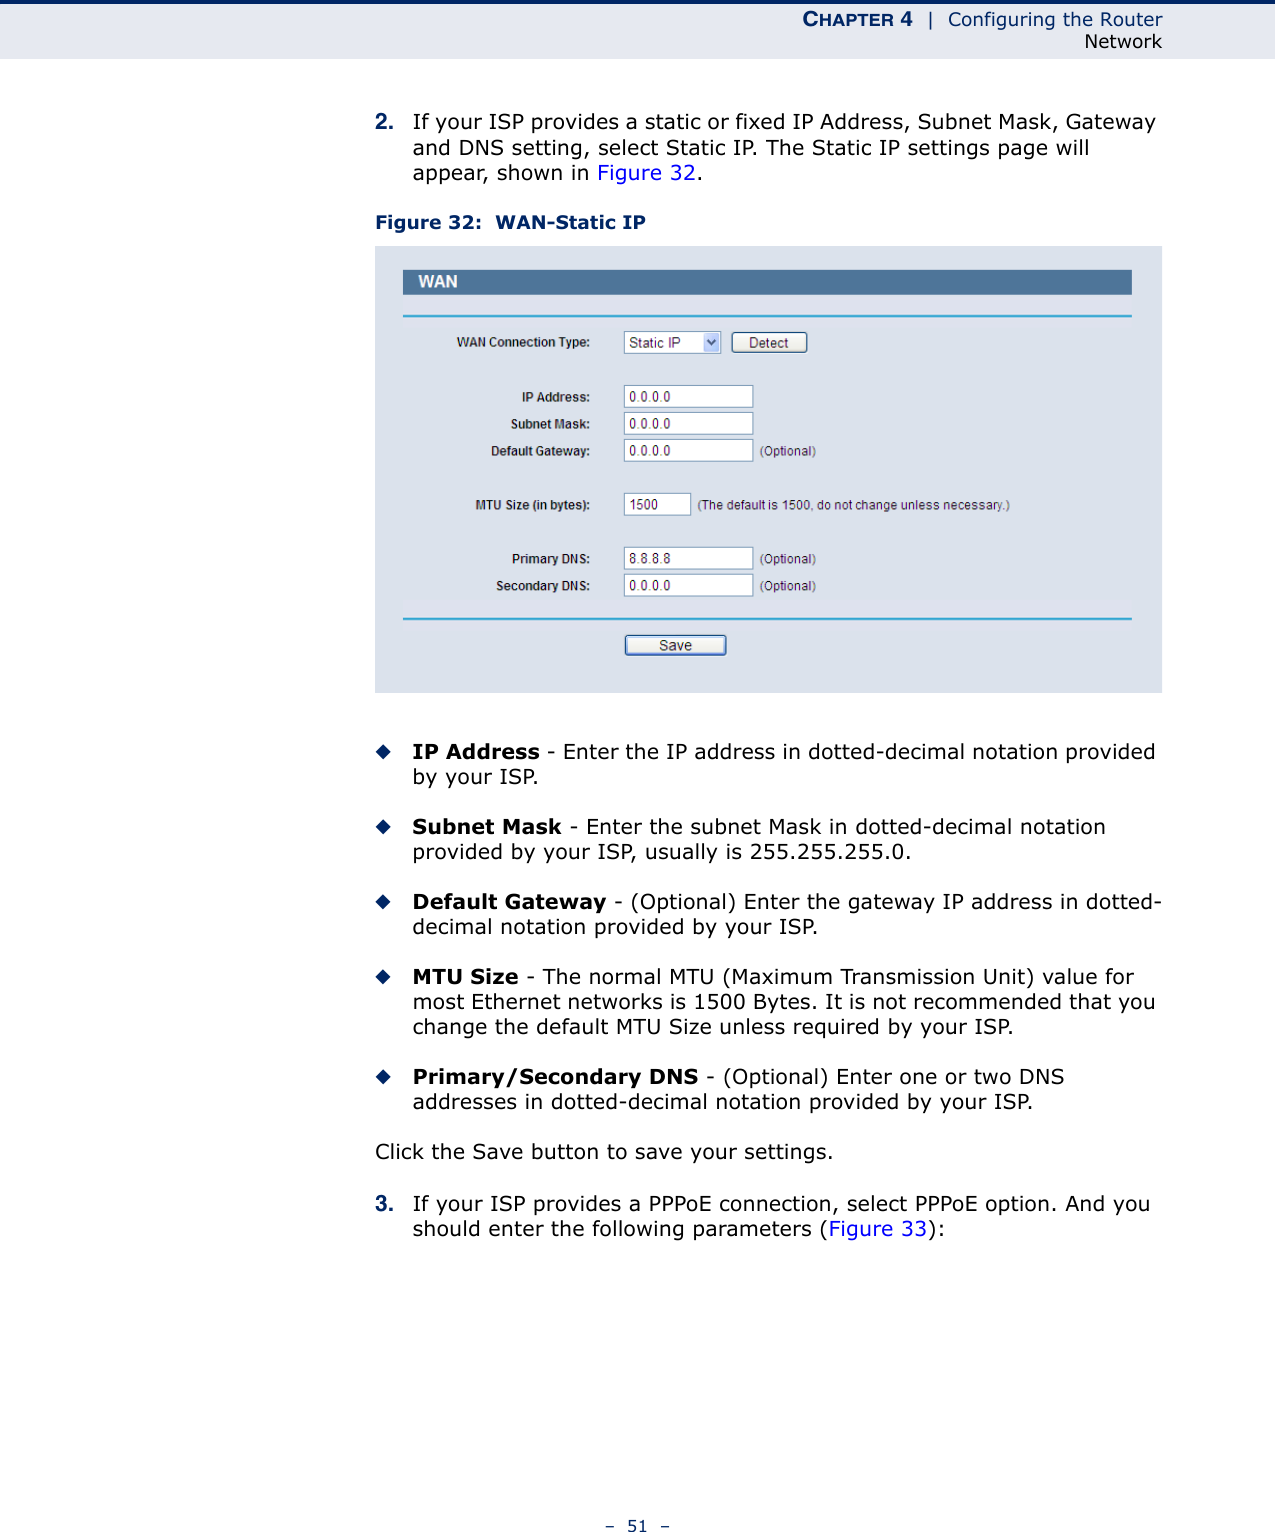 CHAPTER 4  |  Configuring the RouterNetwork–  51  –2. If your ISP provides a static or fixed IP Address, Subnet Mask, Gateway and DNS setting, select Static IP. The Static IP settings page will appear, shown in Figure 32.Figure 32:  WAN-Static IP ◆IP Address - Enter the IP address in dotted-decimal notation provided by your ISP.◆Subnet Mask - Enter the subnet Mask in dotted-decimal notation provided by your ISP, usually is 255.255.255.0.◆Default Gateway - (Optional) Enter the gateway IP address in dotted-decimal notation provided by your ISP.◆MTU Size - The normal MTU (Maximum Transmission Unit) value for most Ethernet networks is 1500 Bytes. It is not recommended that you change the default MTU Size unless required by your ISP.◆Primary/Secondary DNS - (Optional) Enter one or two DNS addresses in dotted-decimal notation provided by your ISP.Click the Save button to save your settings.3. If your ISP provides a PPPoE connection, select PPPoE option. And you should enter the following parameters (Figure 33):